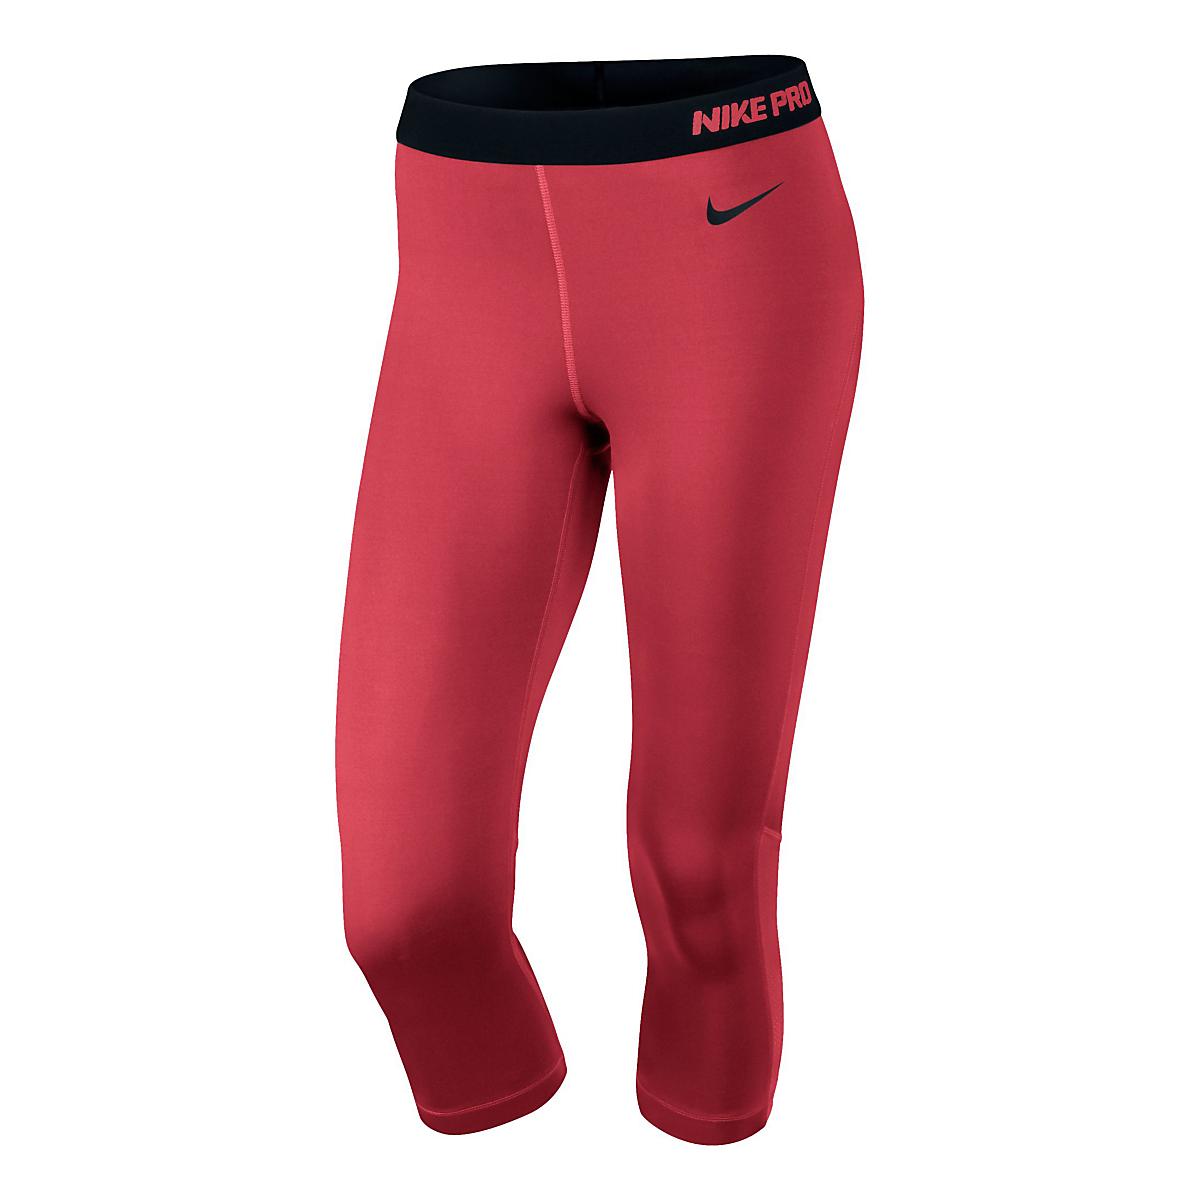 Womens Nike Epic Lux Capri Tights at Road Runner Sports